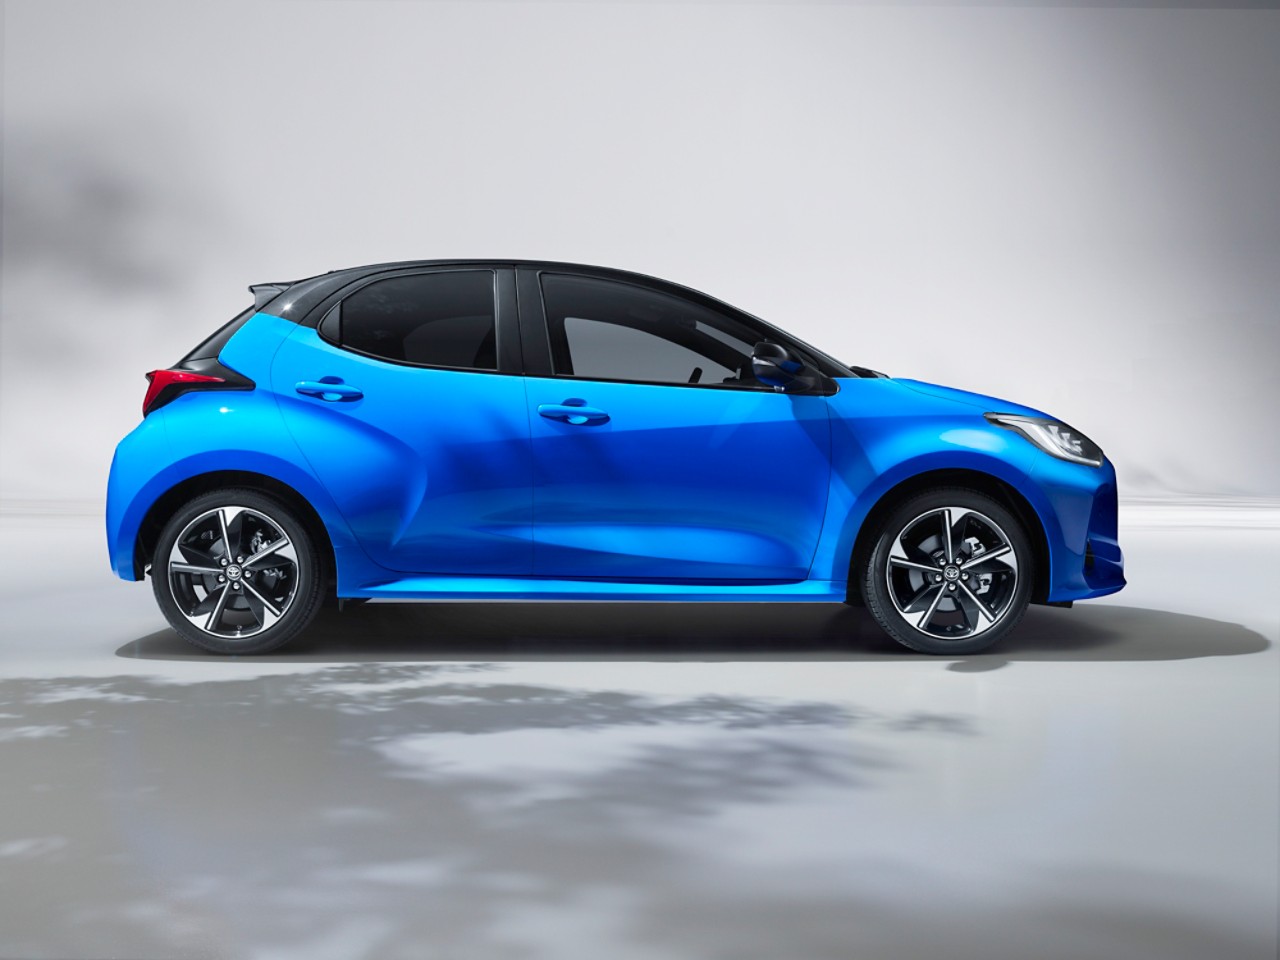 A metallic blue Toyota Yaris Hybrid car is parked in a courtyard locaOon. The shadow from a tree parOally covers the concrete floor.